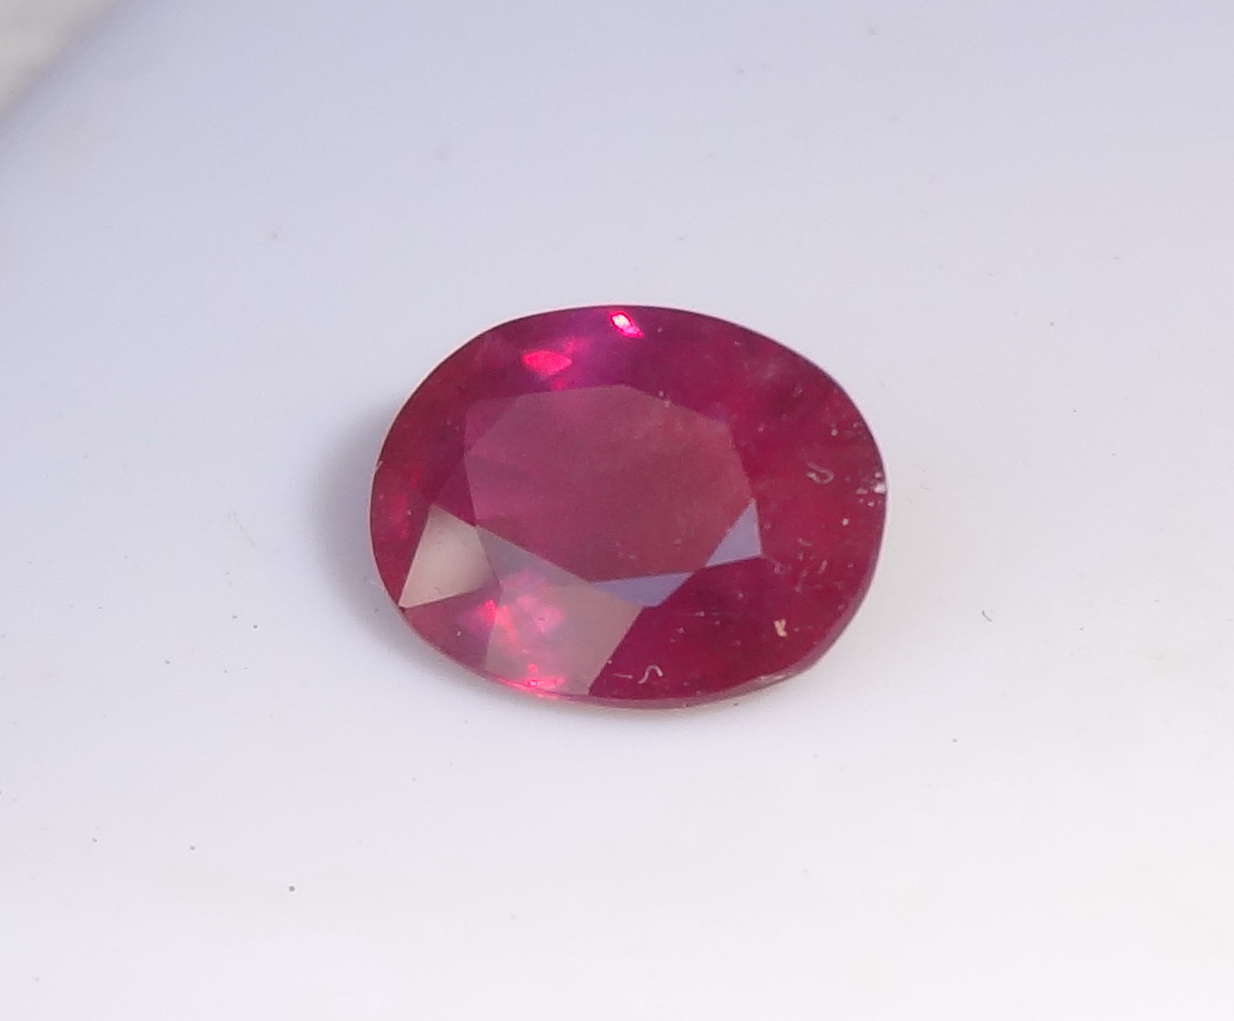 Buy cheap and affordable large Ruby